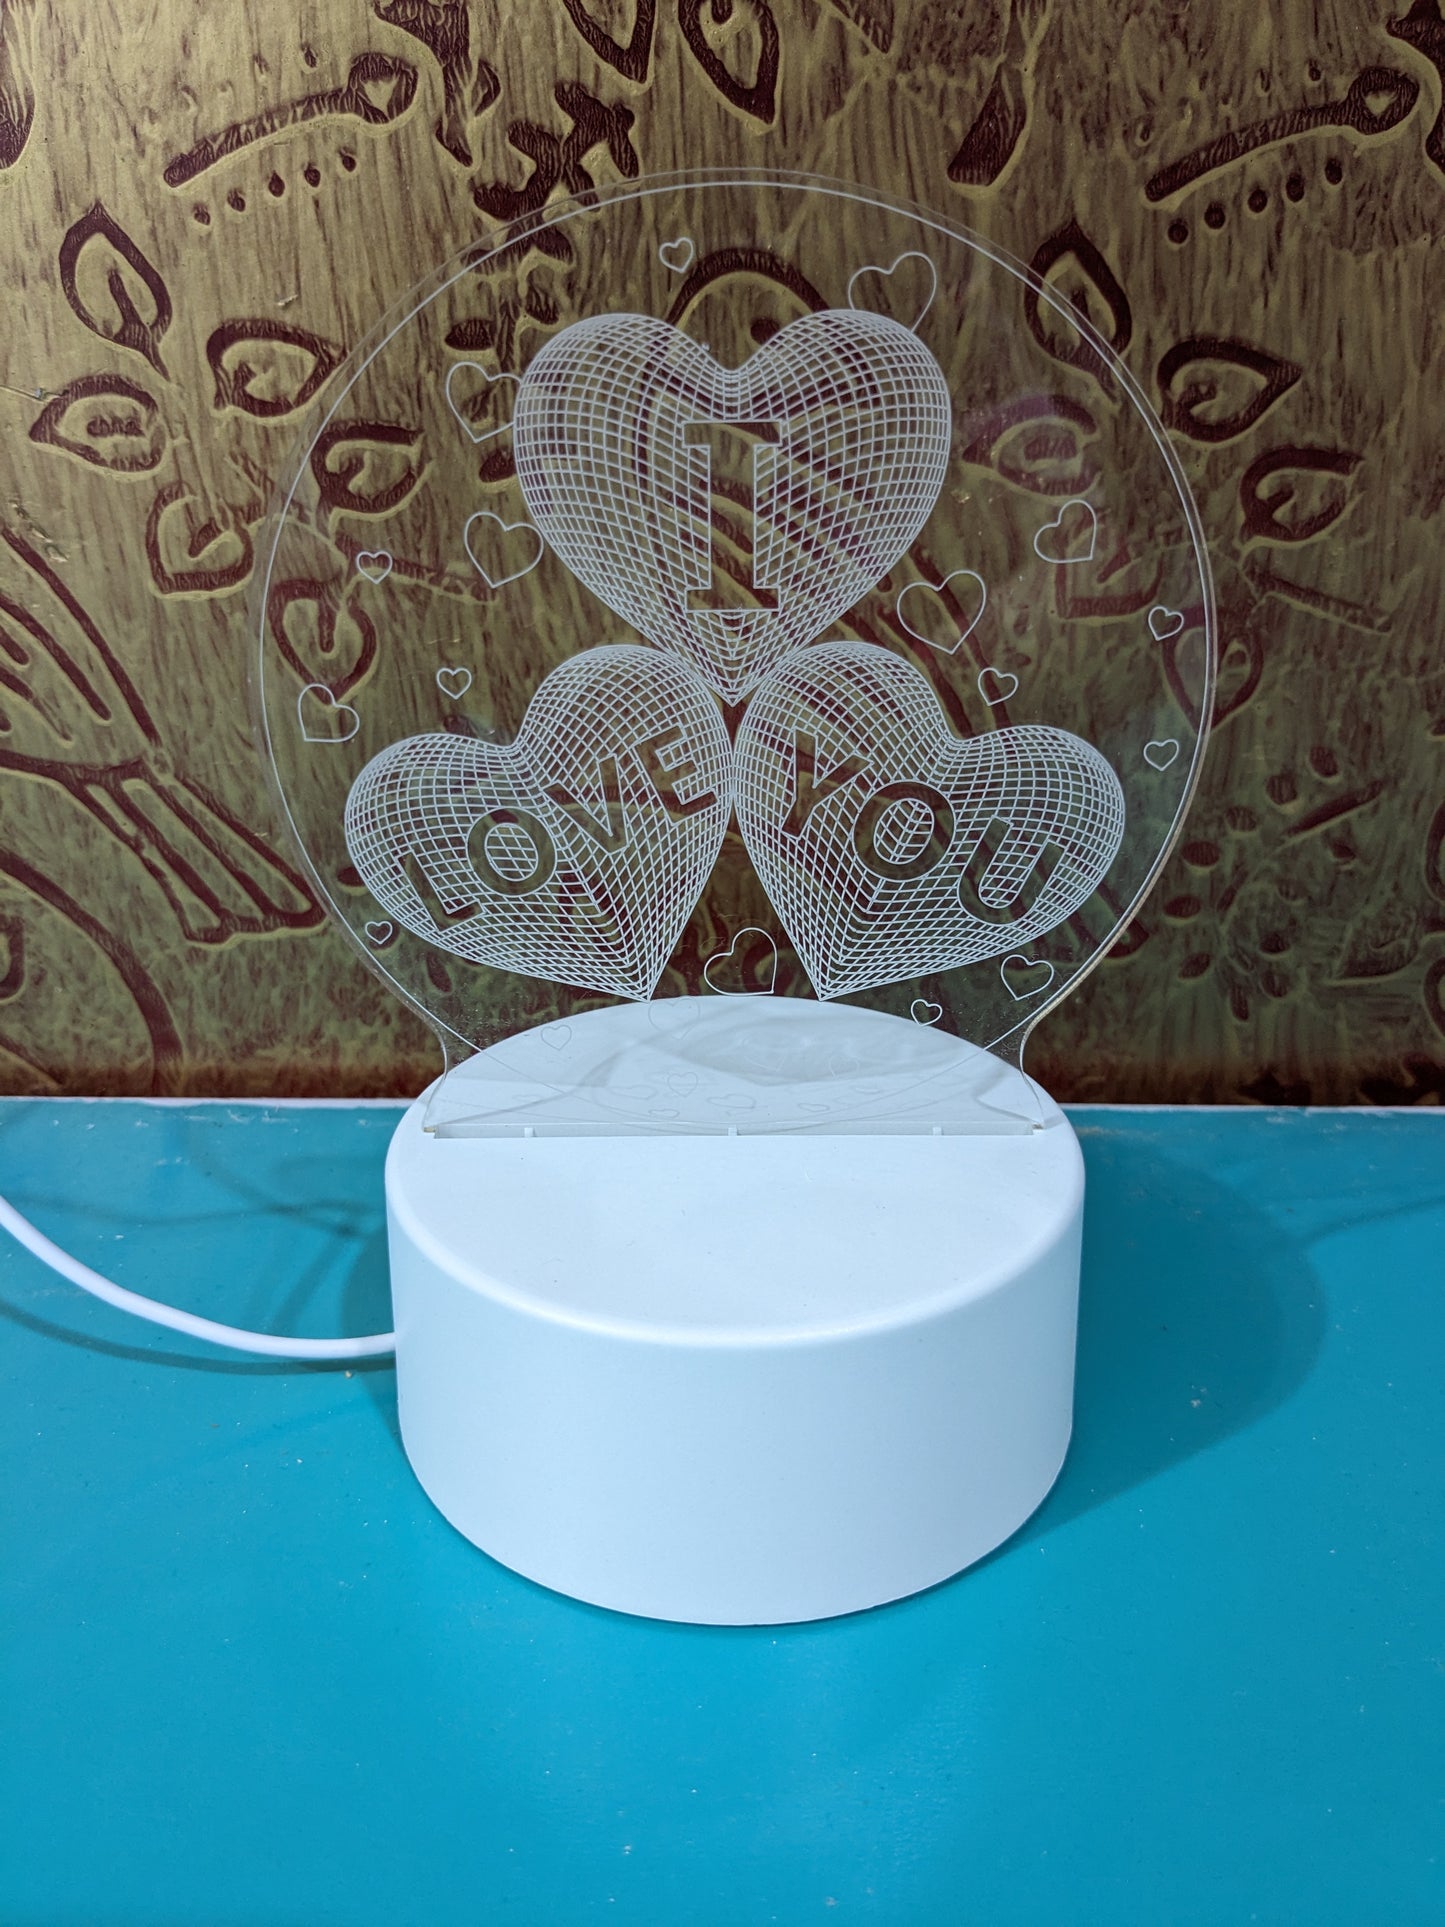 I Love You Heart 3D Illusion Night Lamp, Acrylic LED Lamp, Home Decor, Kids Bedroom Decor, Best Gift, LED Plug and Play (16 cm)